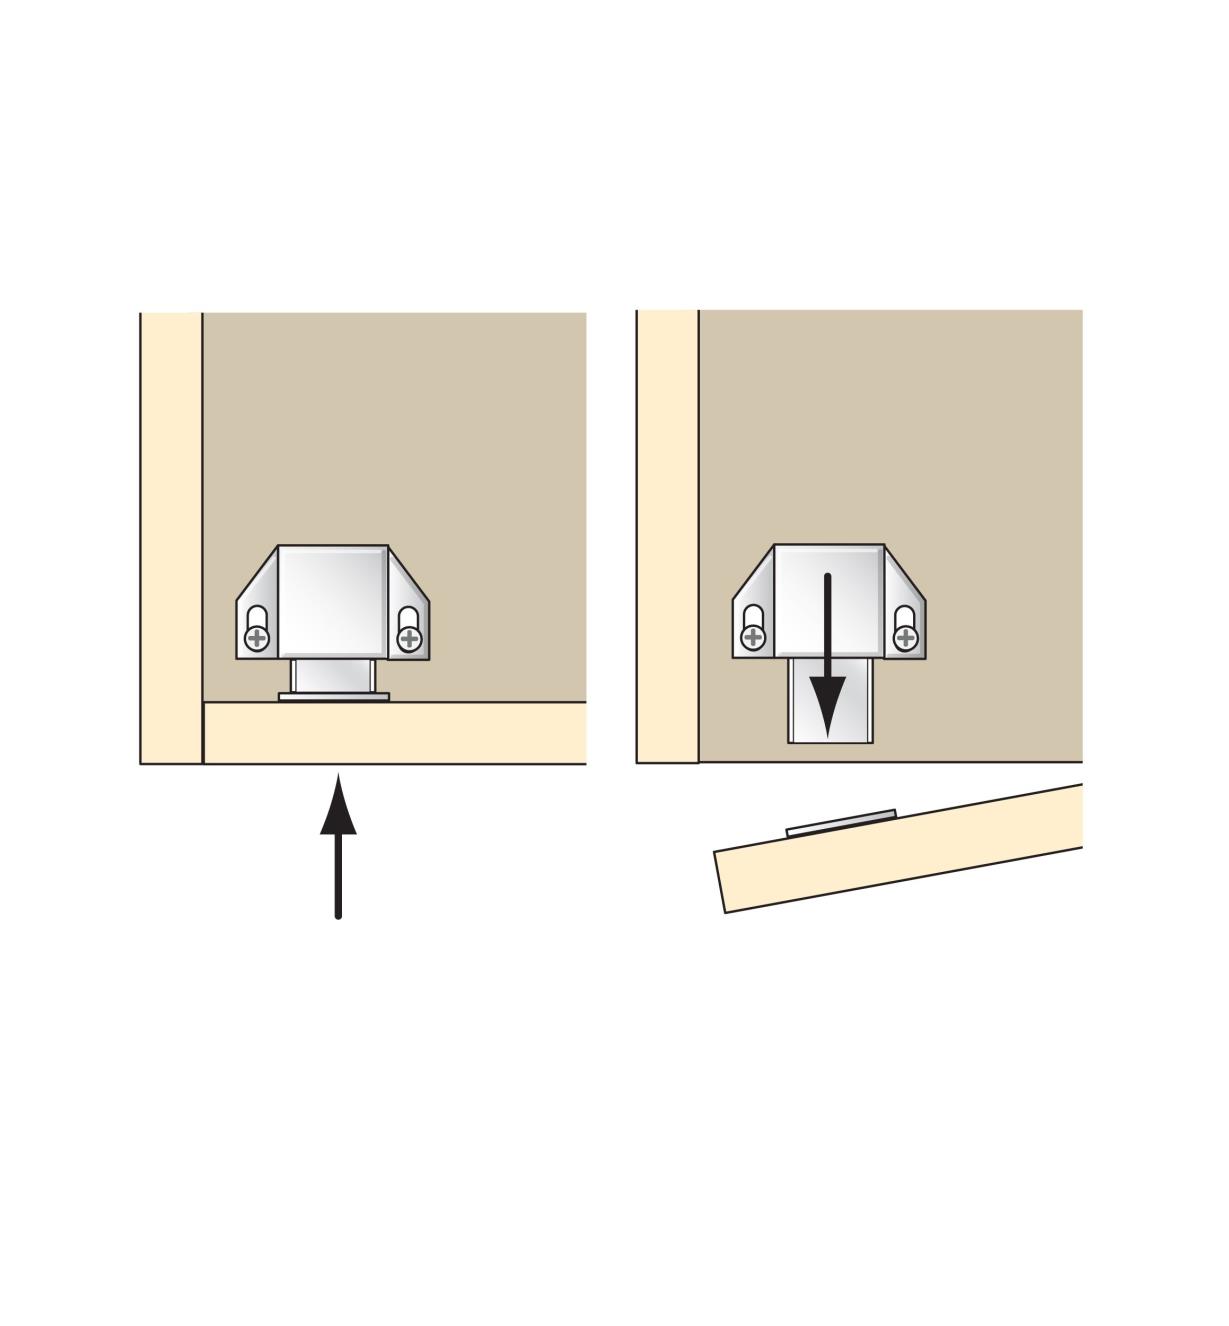 Illustrations of single latch in closed and open positions